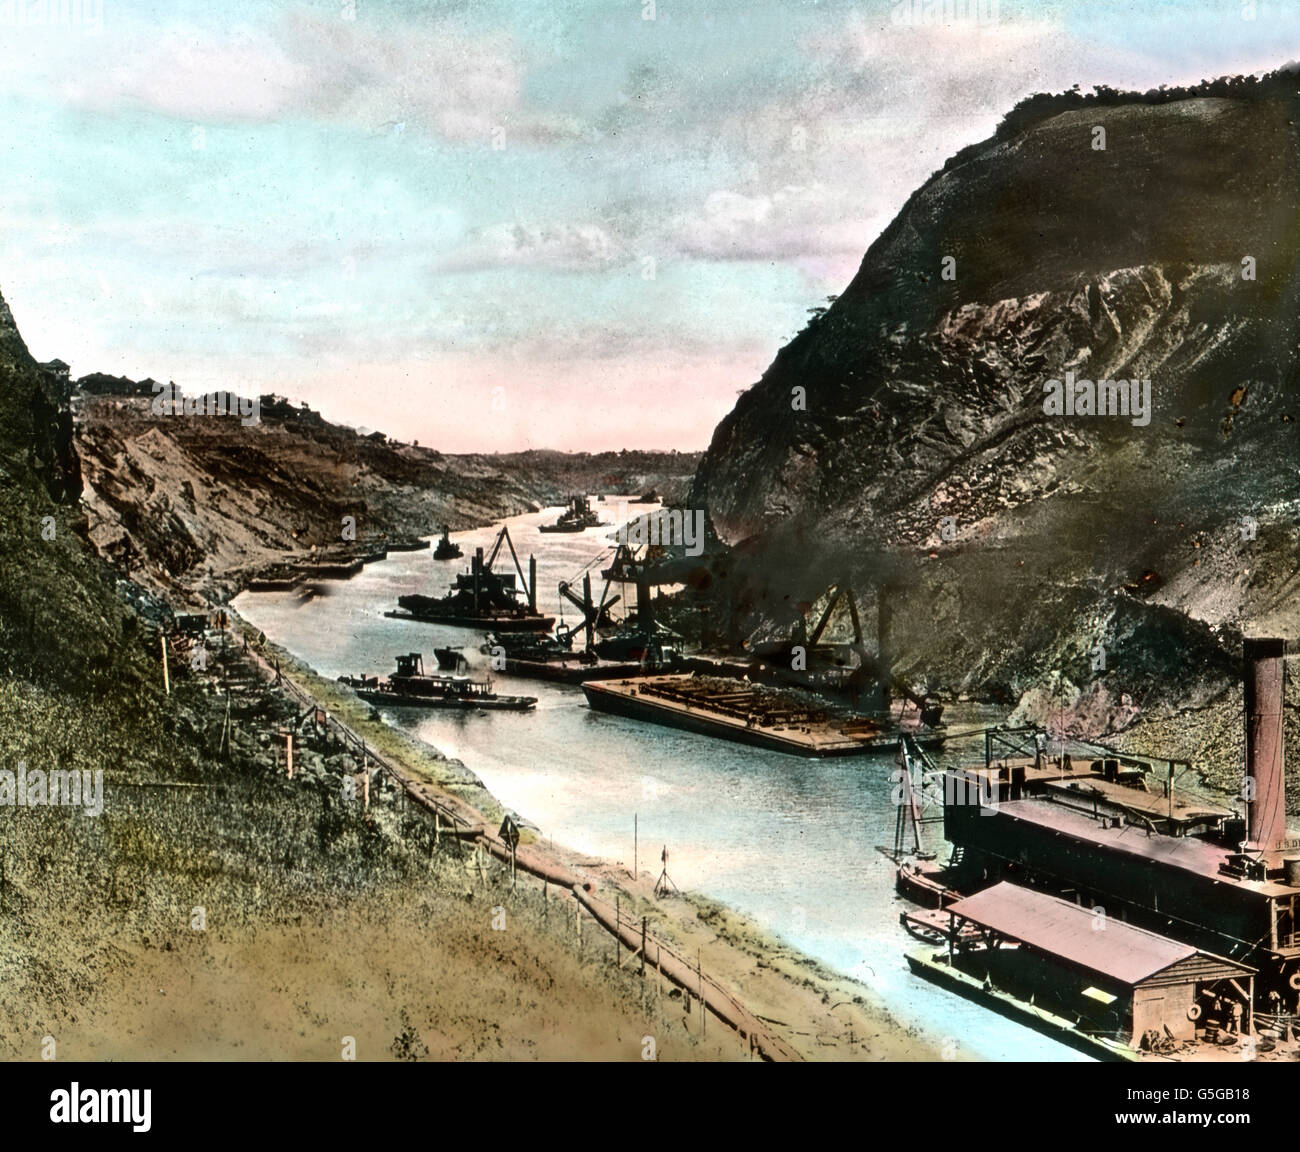 Durch den Panamakanal. Through the Panama Canal. canal, waterway, ships, water, traffic, connection, landscape, mountains, steamers, valley, volcanicity, volcanism, geology, history, historical, 1910s, 1920s, 20th century, archive, Carl Simon, hand-coloured glass slide Stock Photo